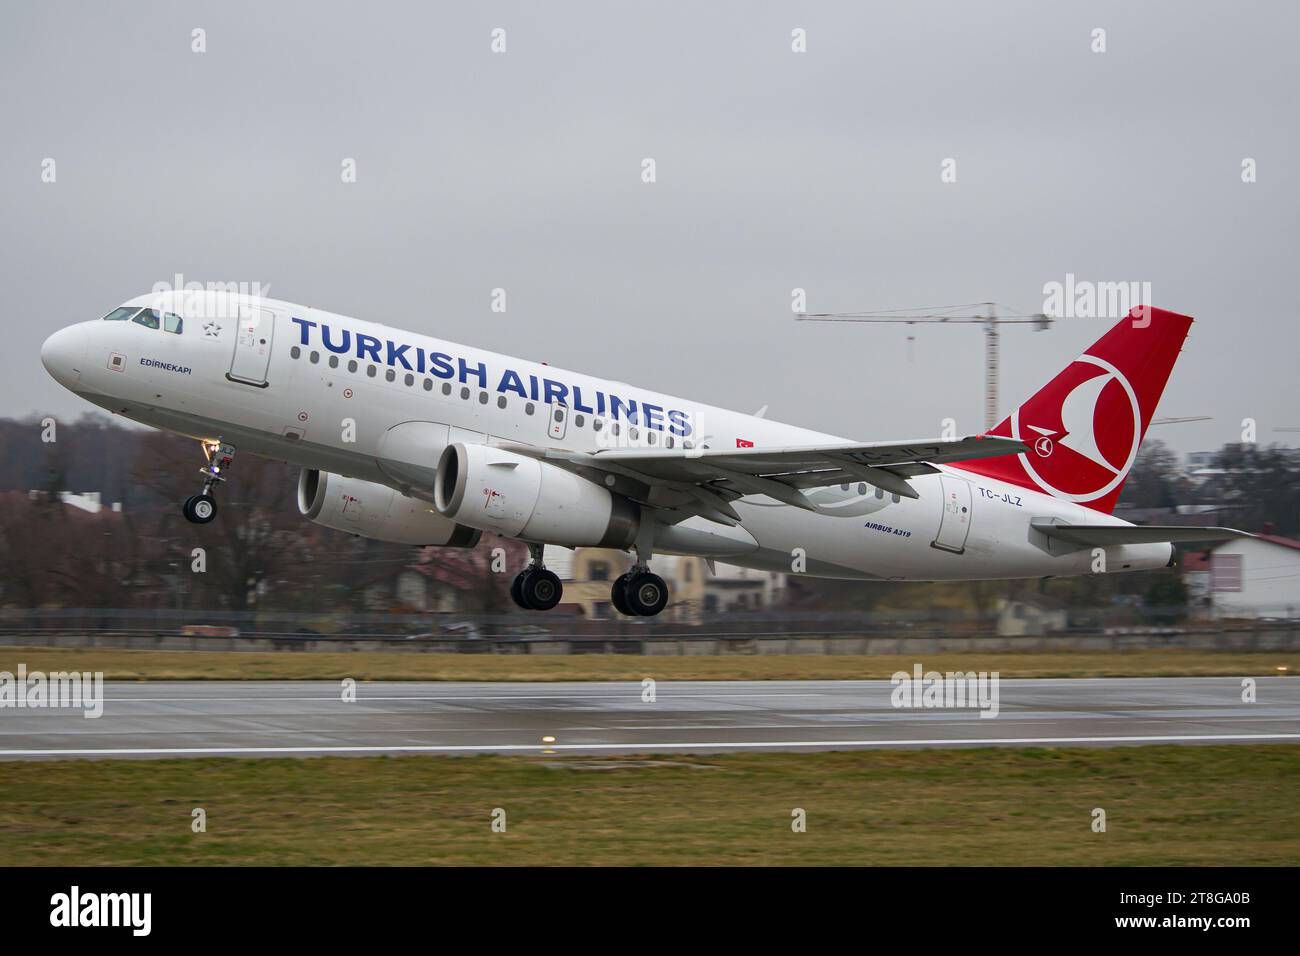 Turkish Airlines Airbus A319 taking off from Lviv International Airport for a flight to Istanbul, Turkey Stock Photo